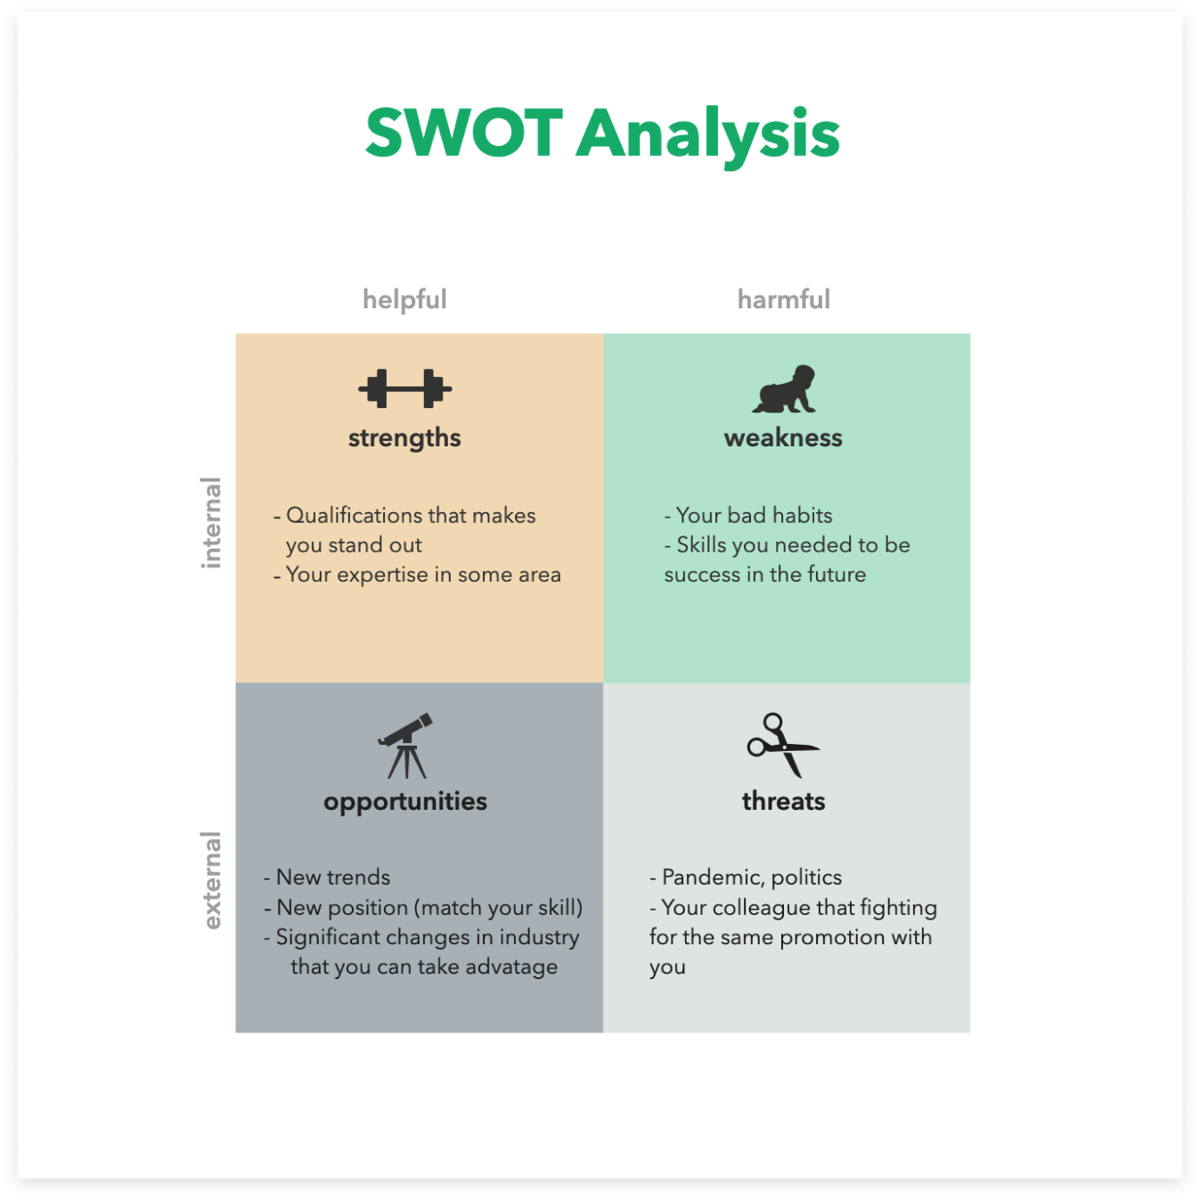 swot analysis for personal growth